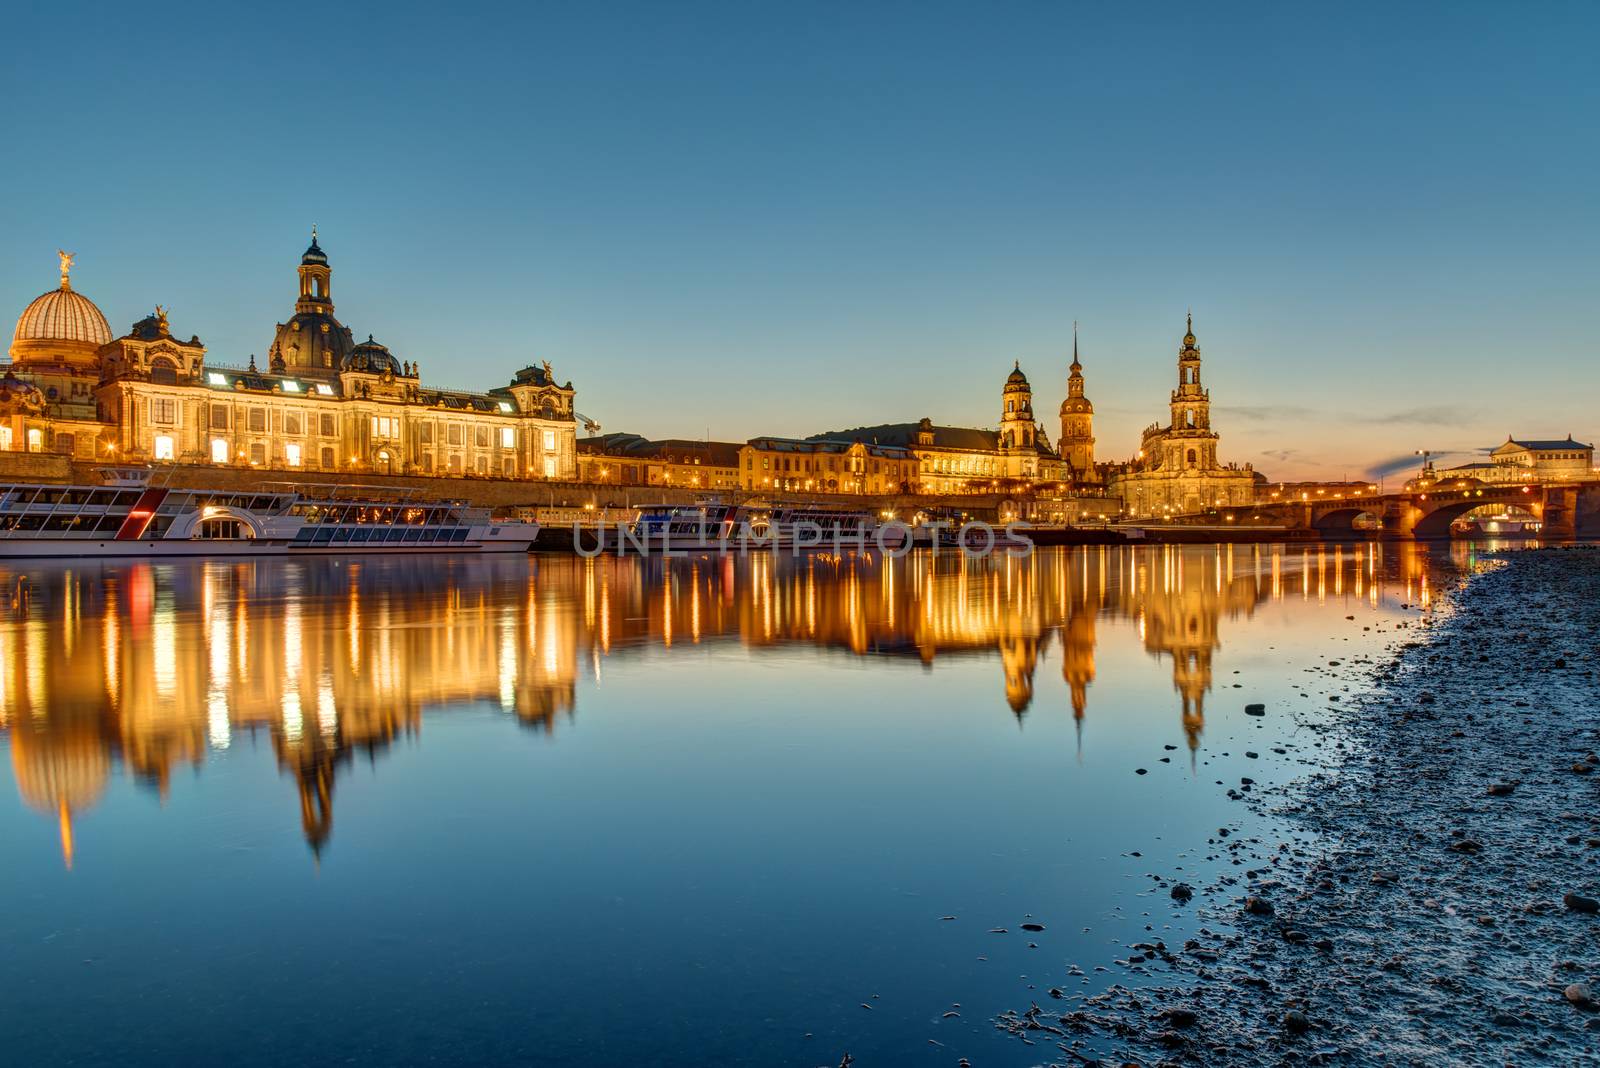 The famous skyline of Dresden in Germany at dawn